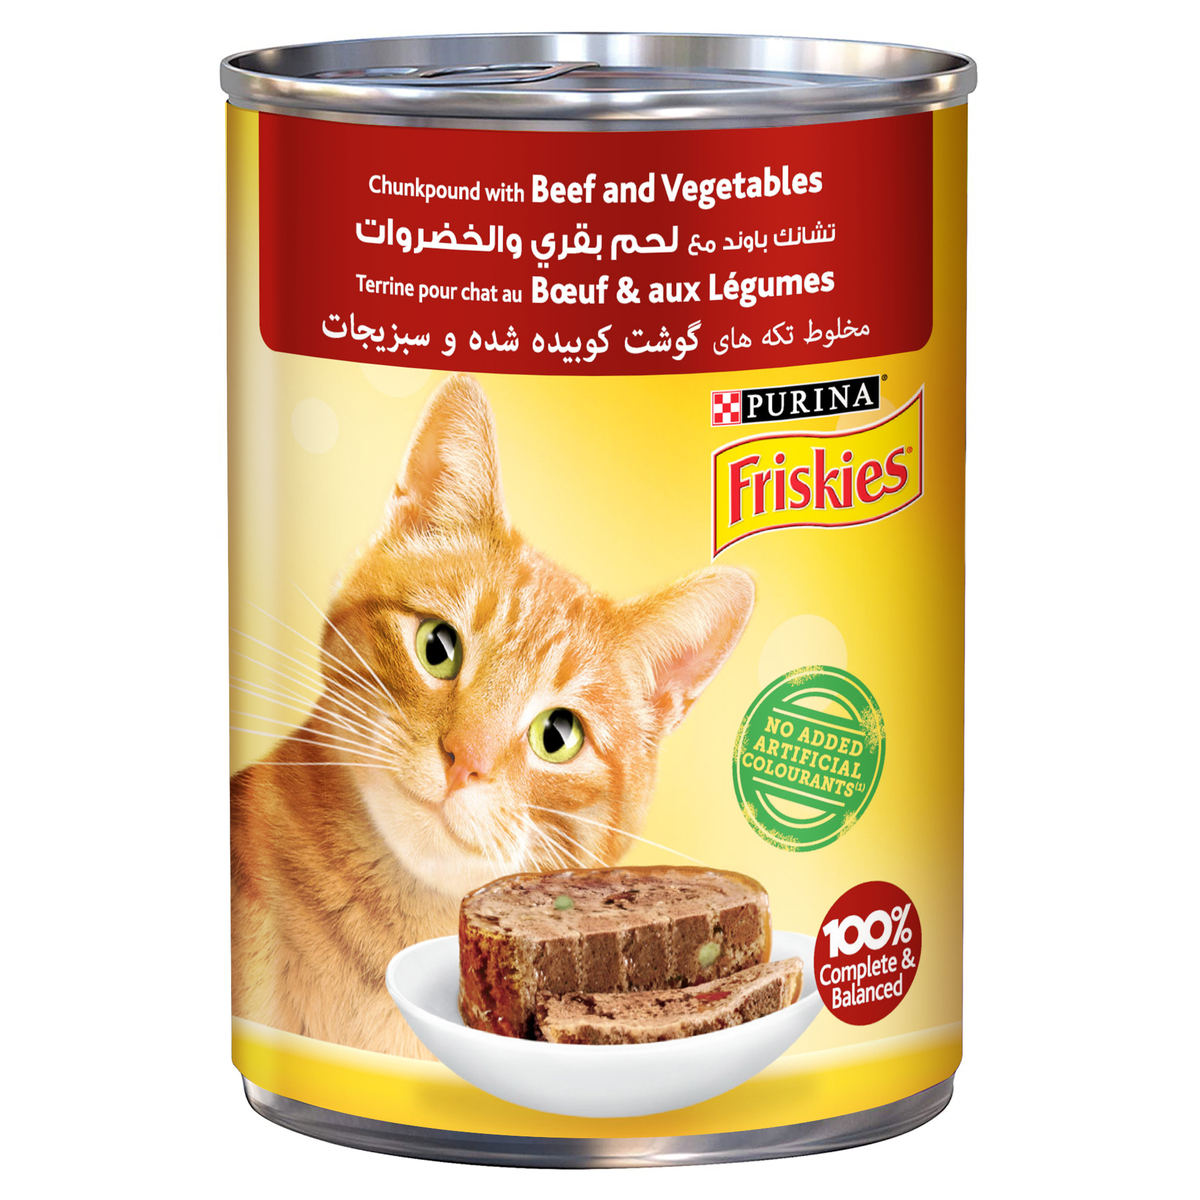 Purina Friskies Wet Cat Food Beef and Vegetables in Chunkpound 400g